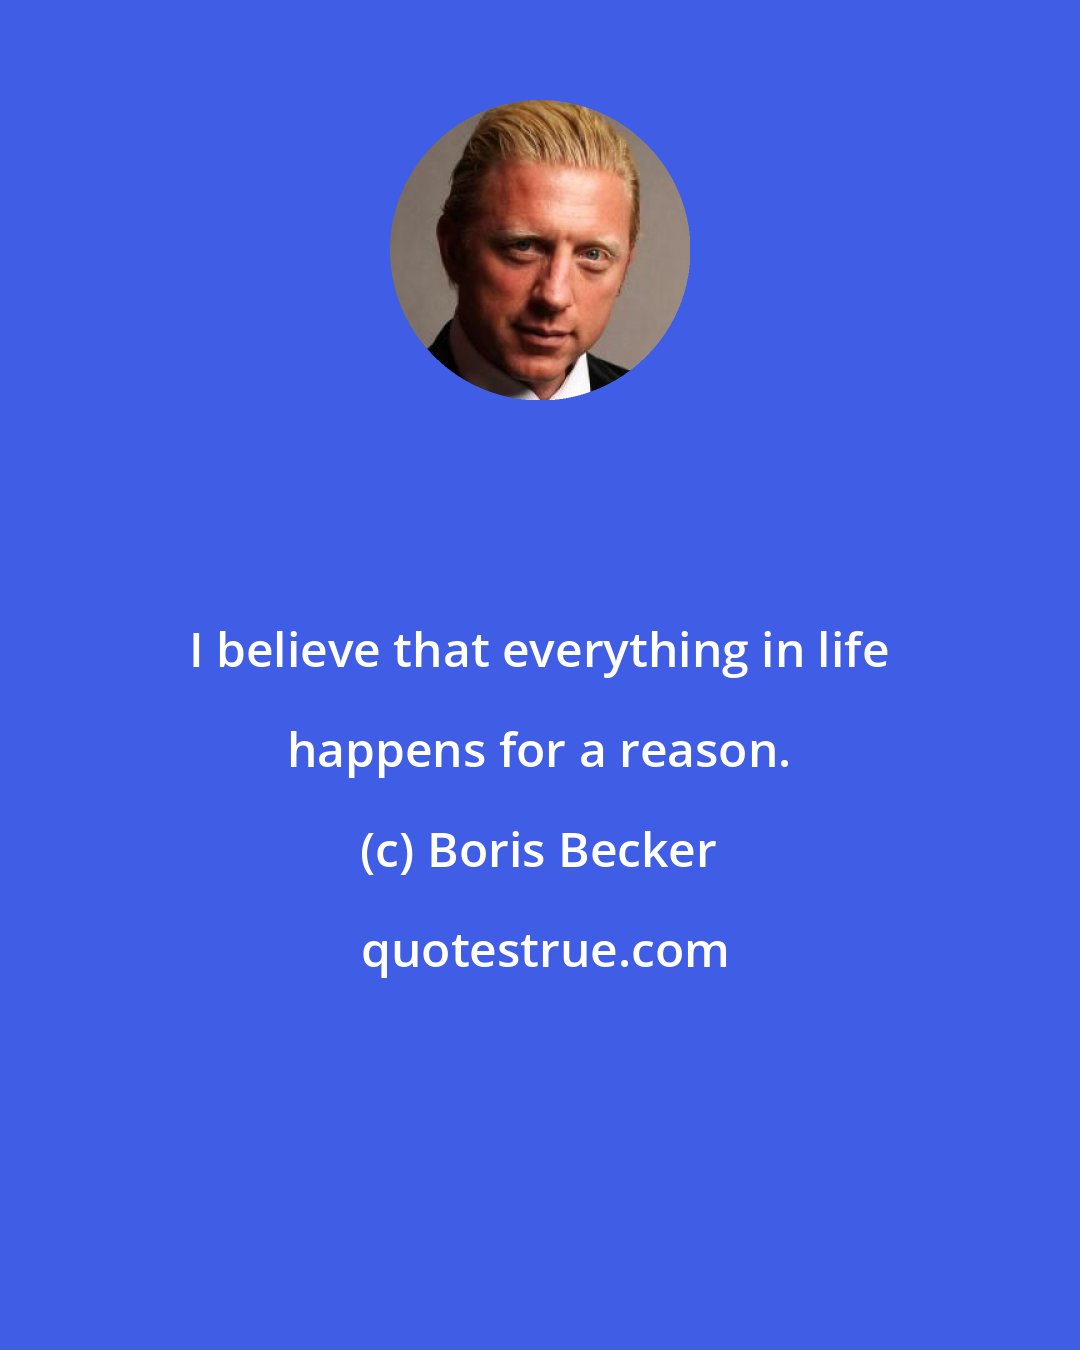 Boris Becker: I believe that everything in life happens for a reason.